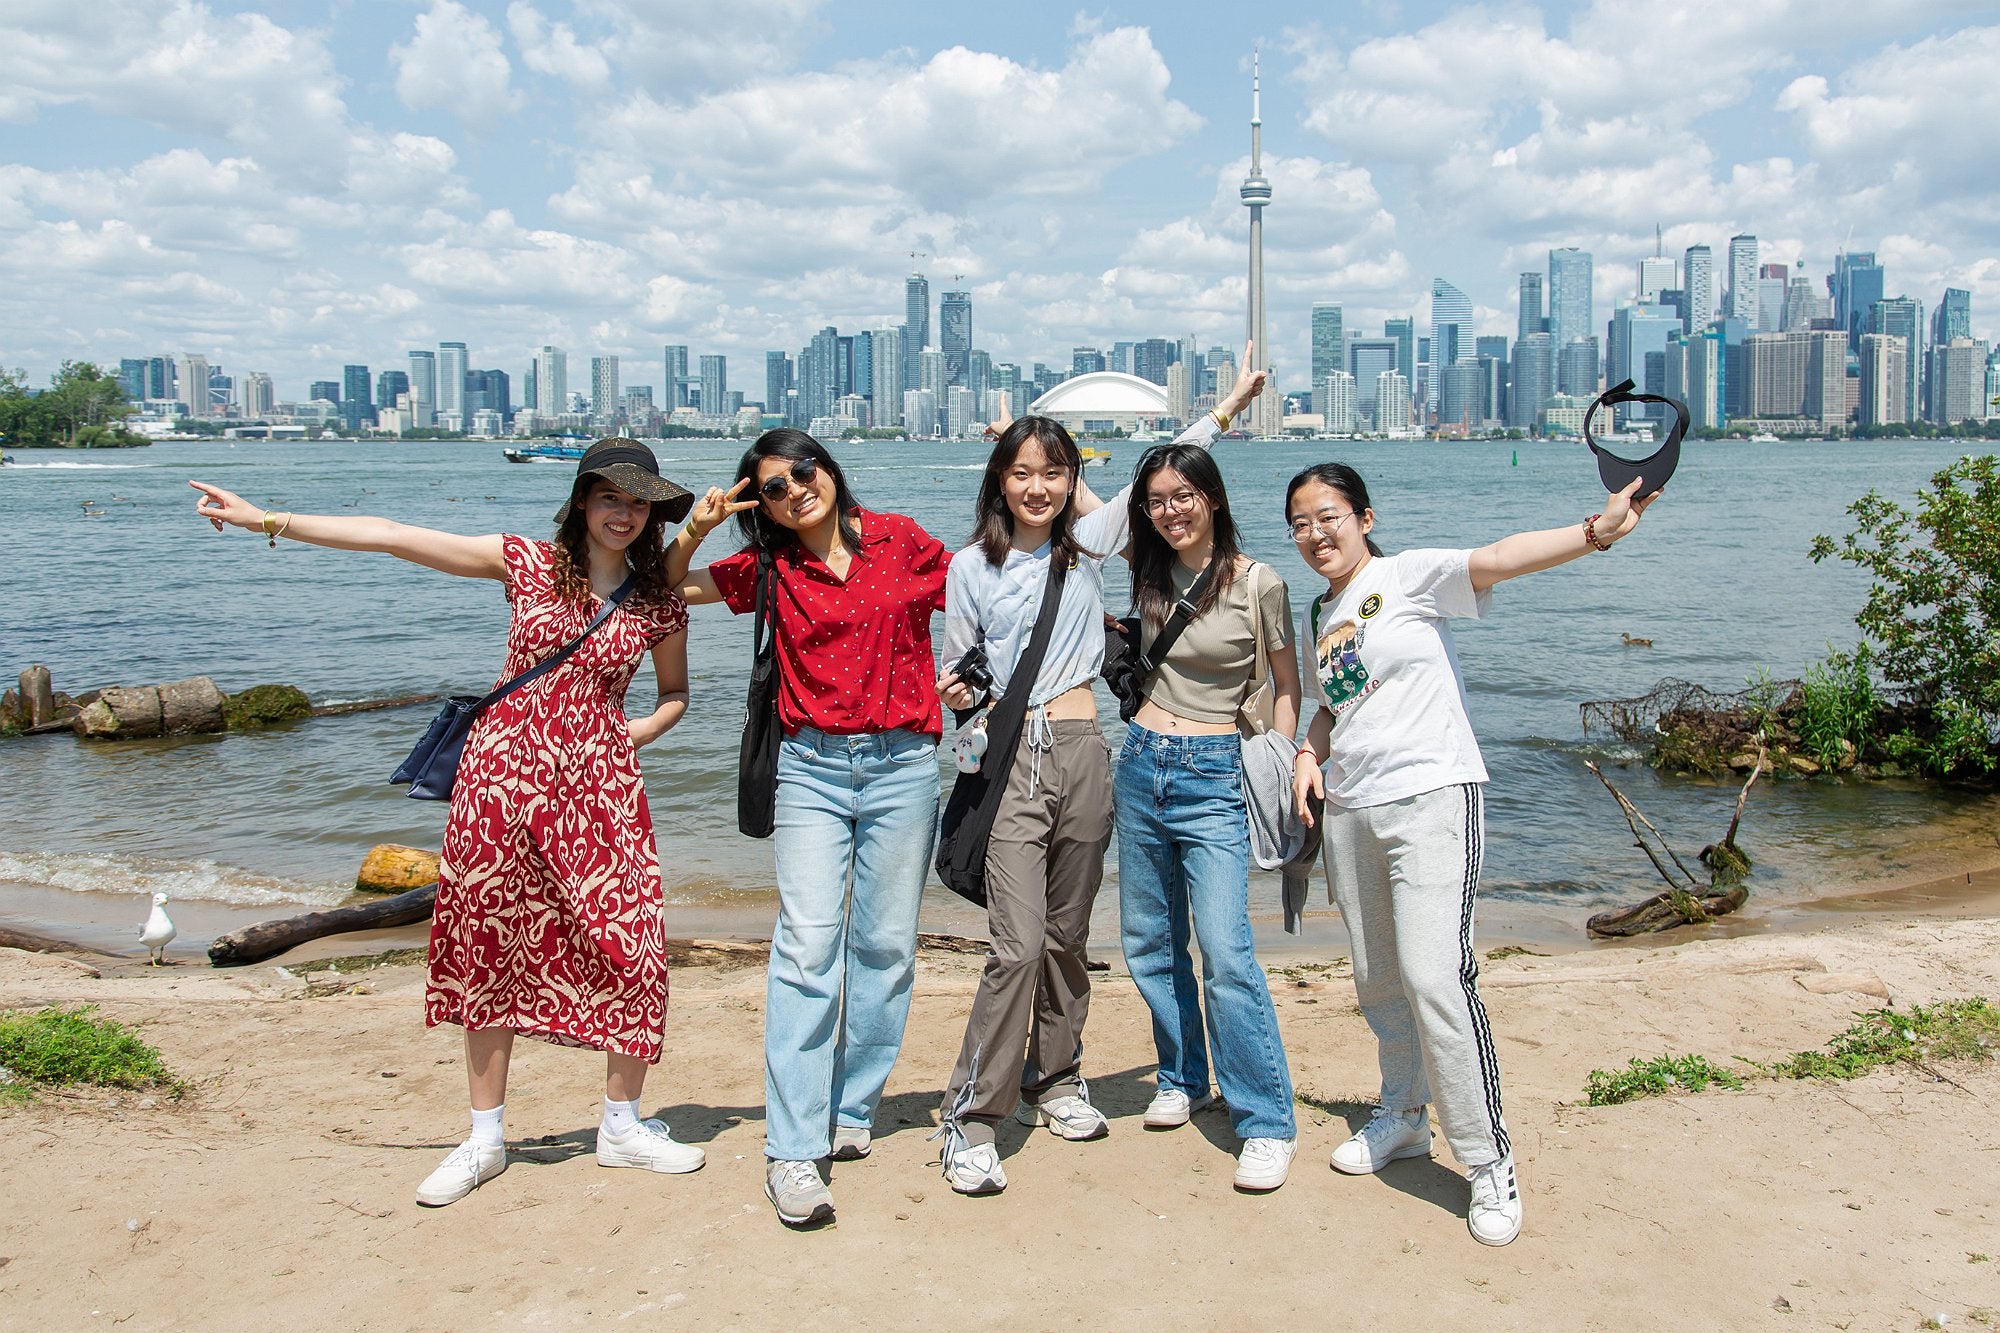 Five people posing for a group photo in front of the Toronto skyline